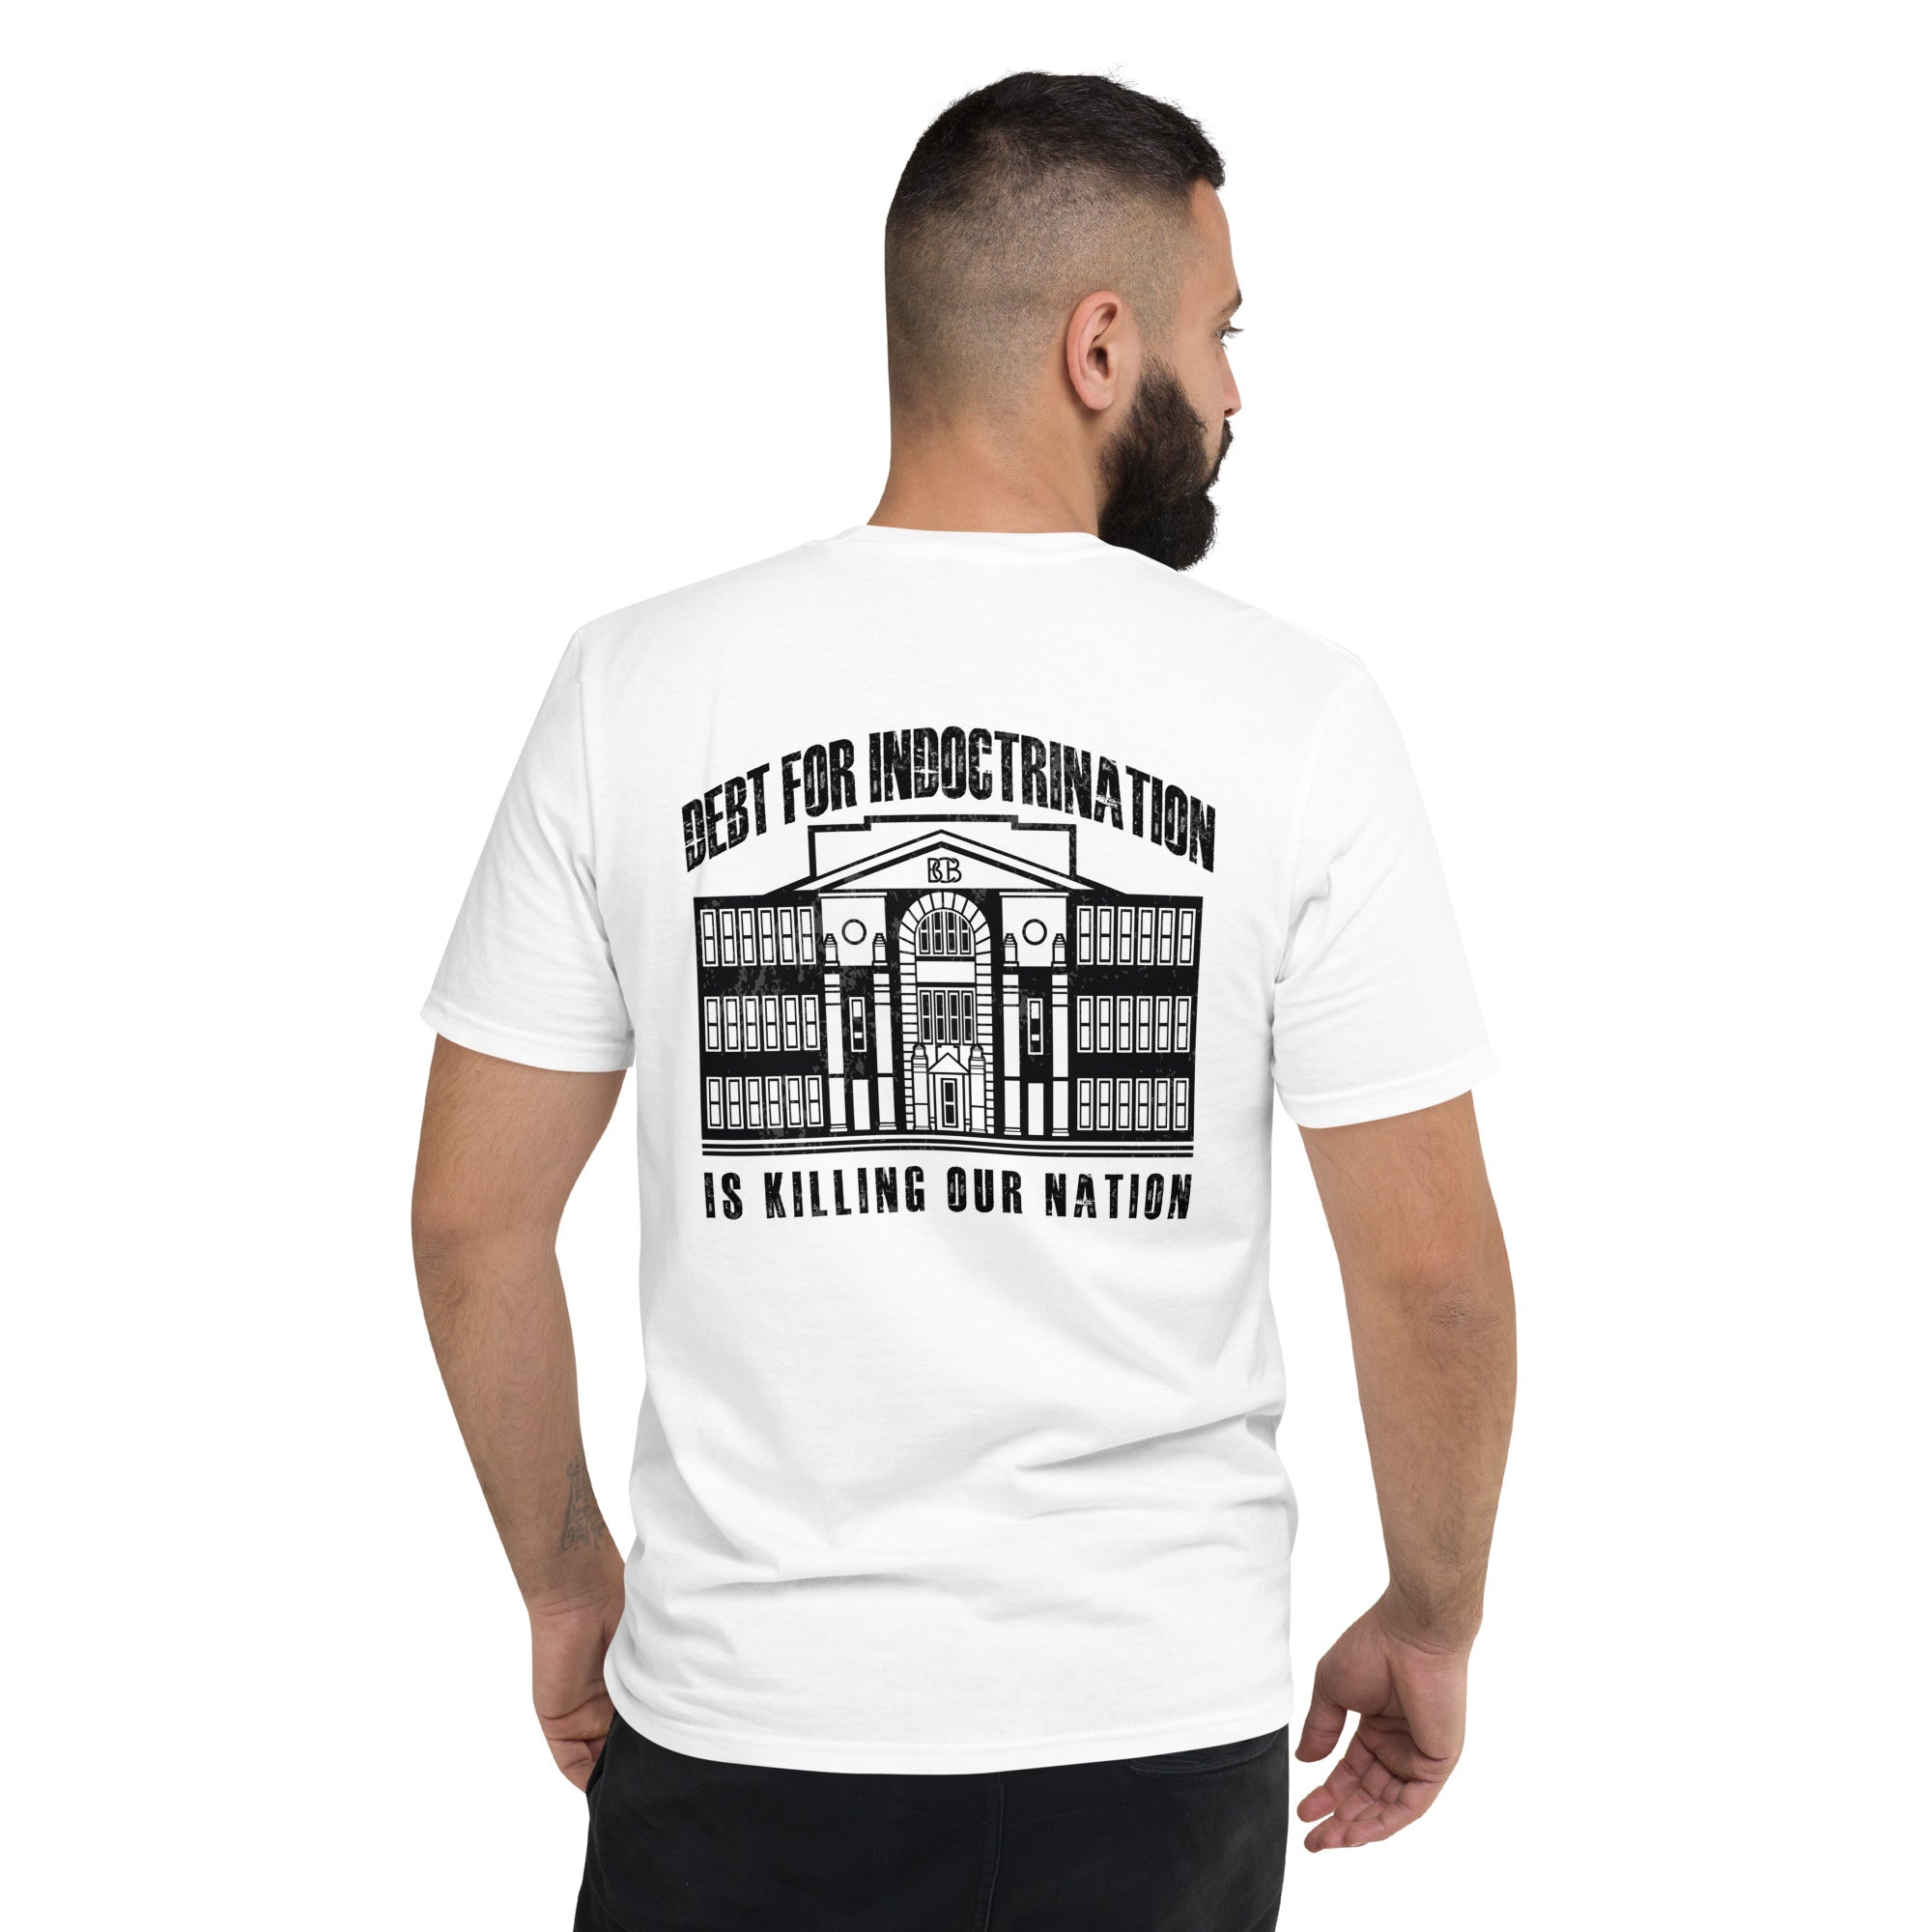 Debt for Indoctrination is killing our nation  I  Short-Sleeve T-Shirt